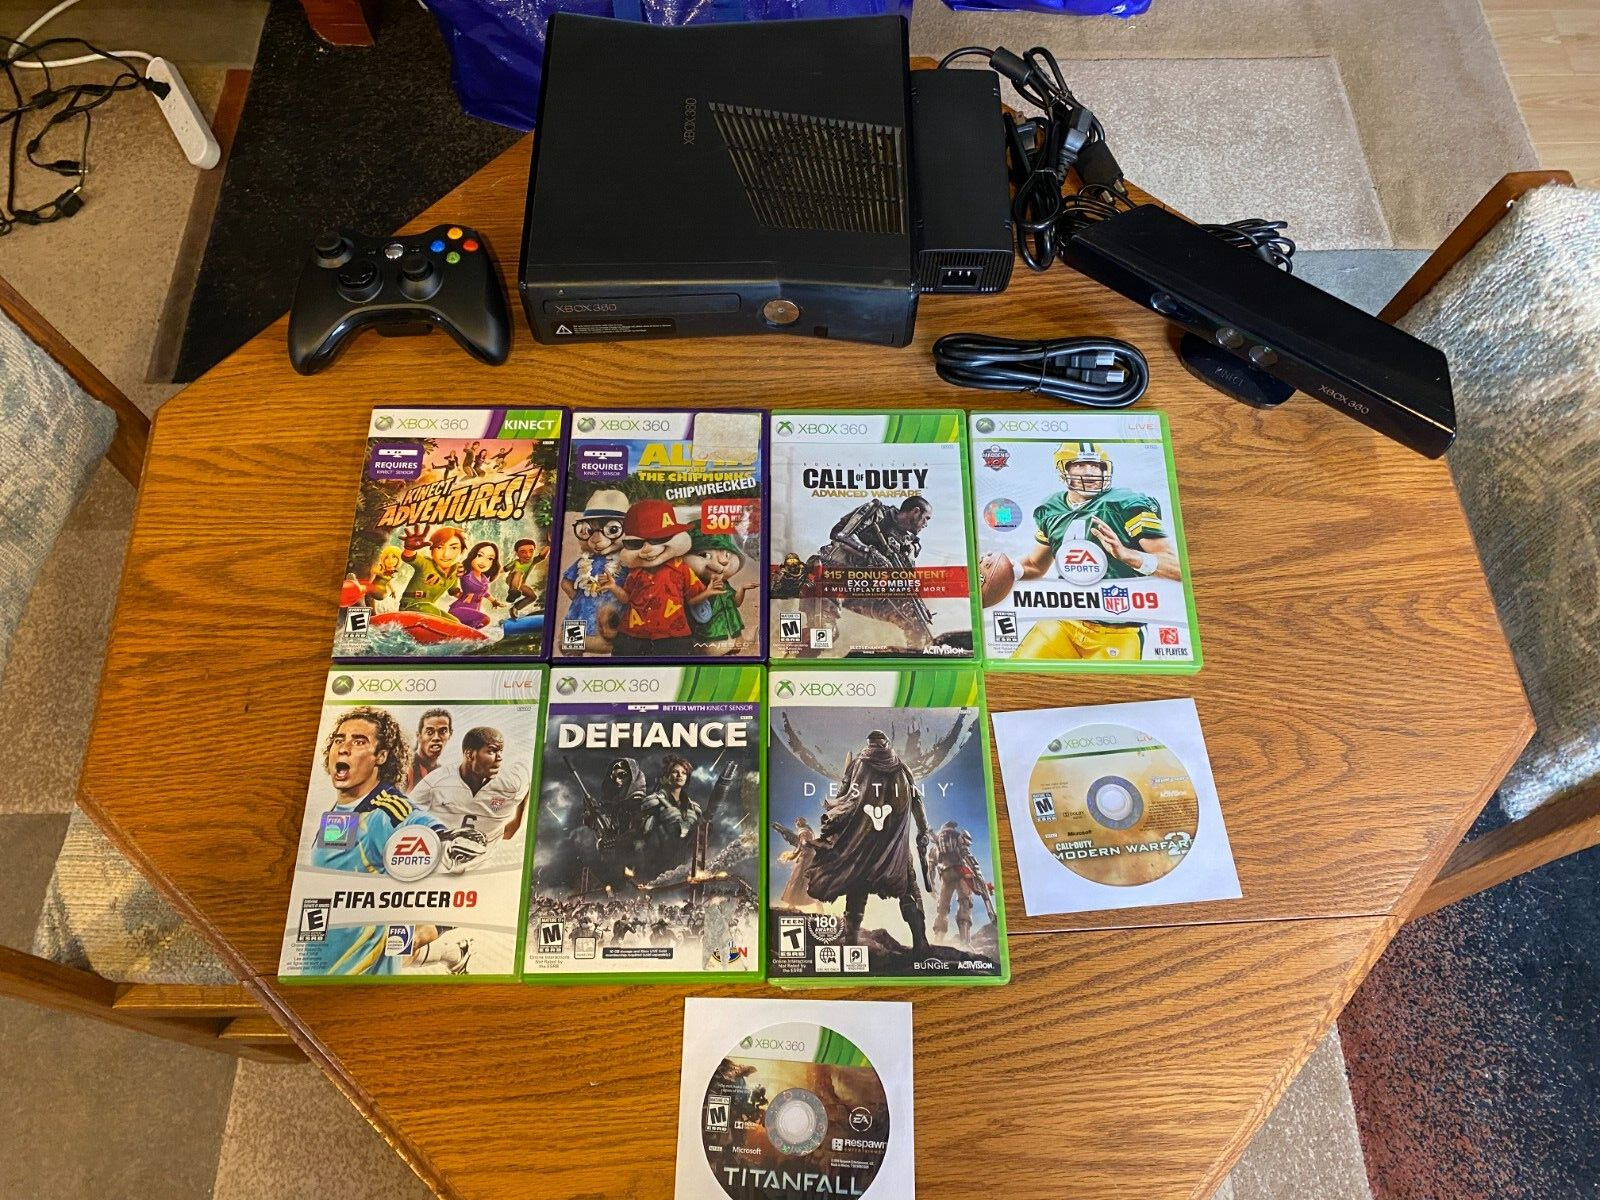 XBOX 360 Slim S 250GB Console System Bundle With Kinect Sensor & 9 Games Works!